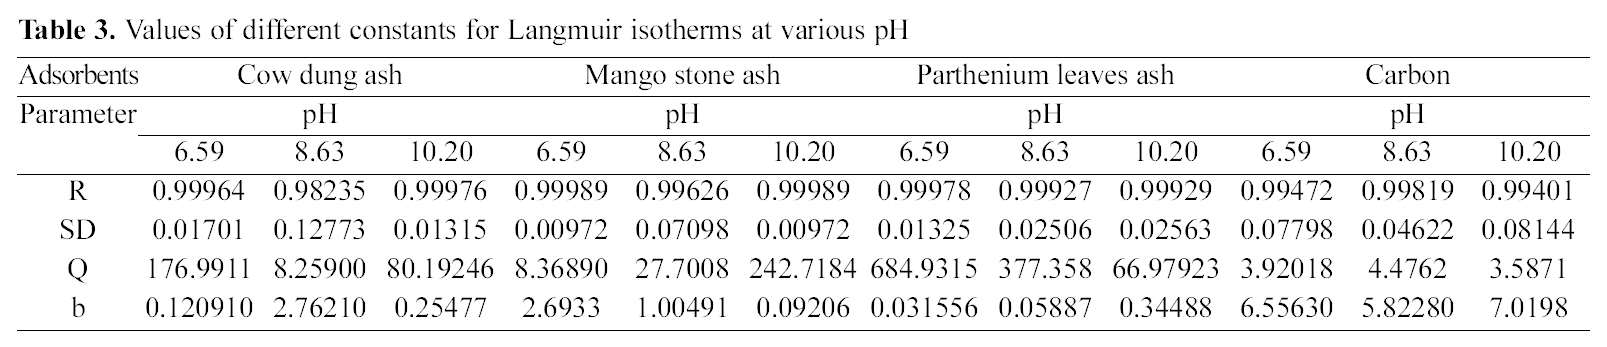 Values of different constants for Langmuir isotherms at various pH